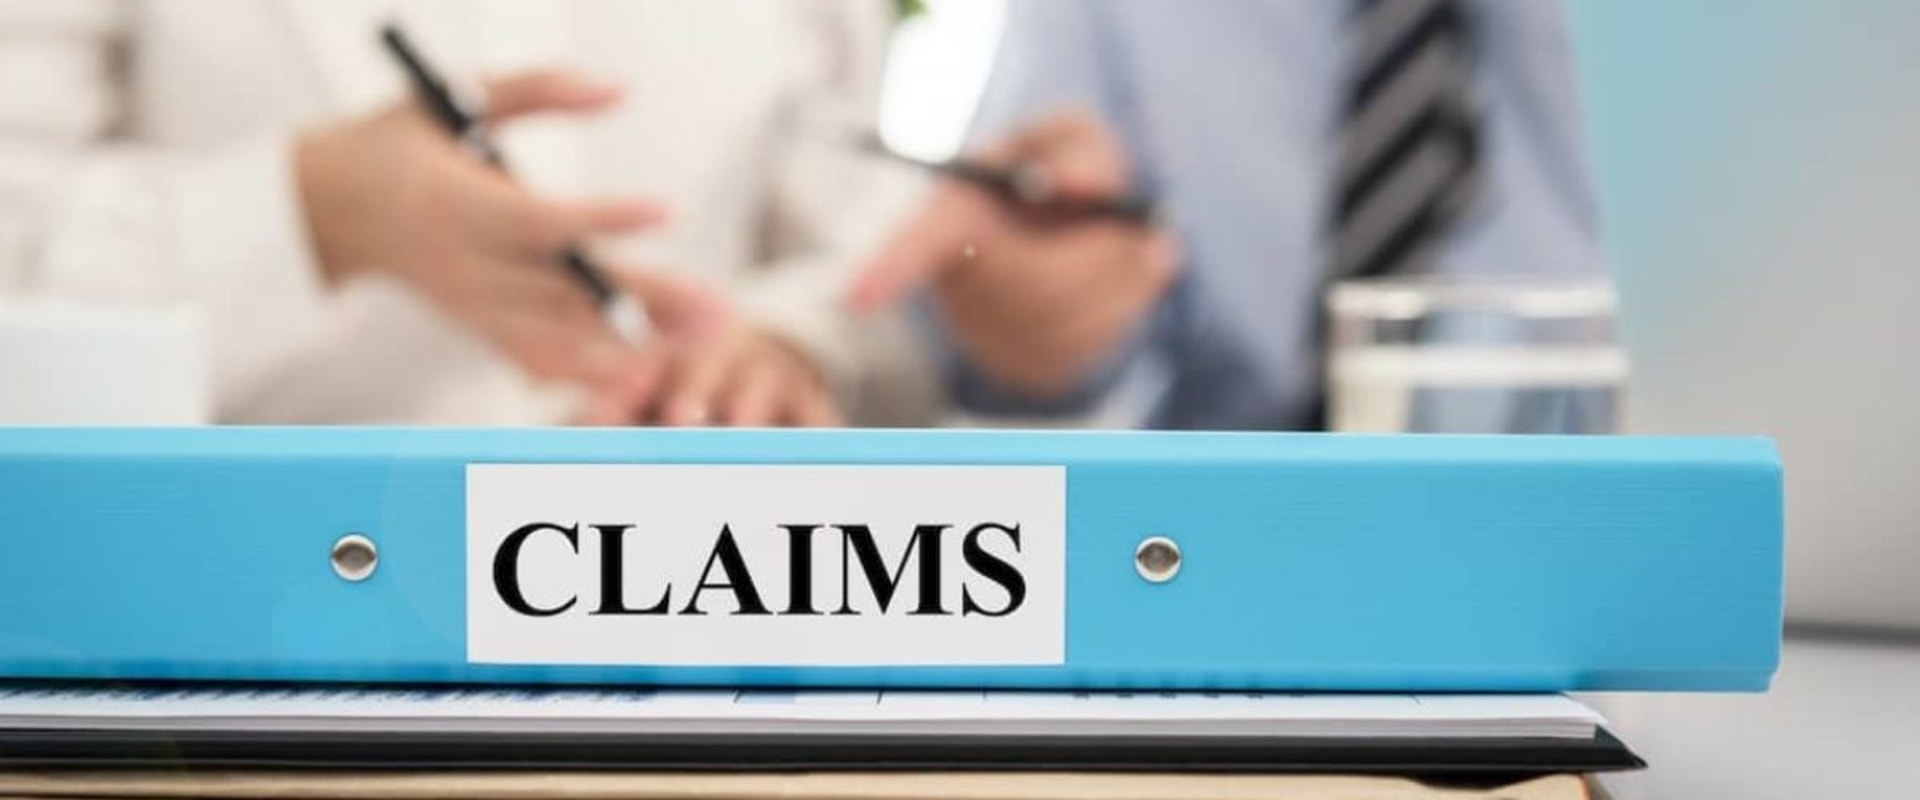 How Long Does an Insurer Have to Respond to a Claim?